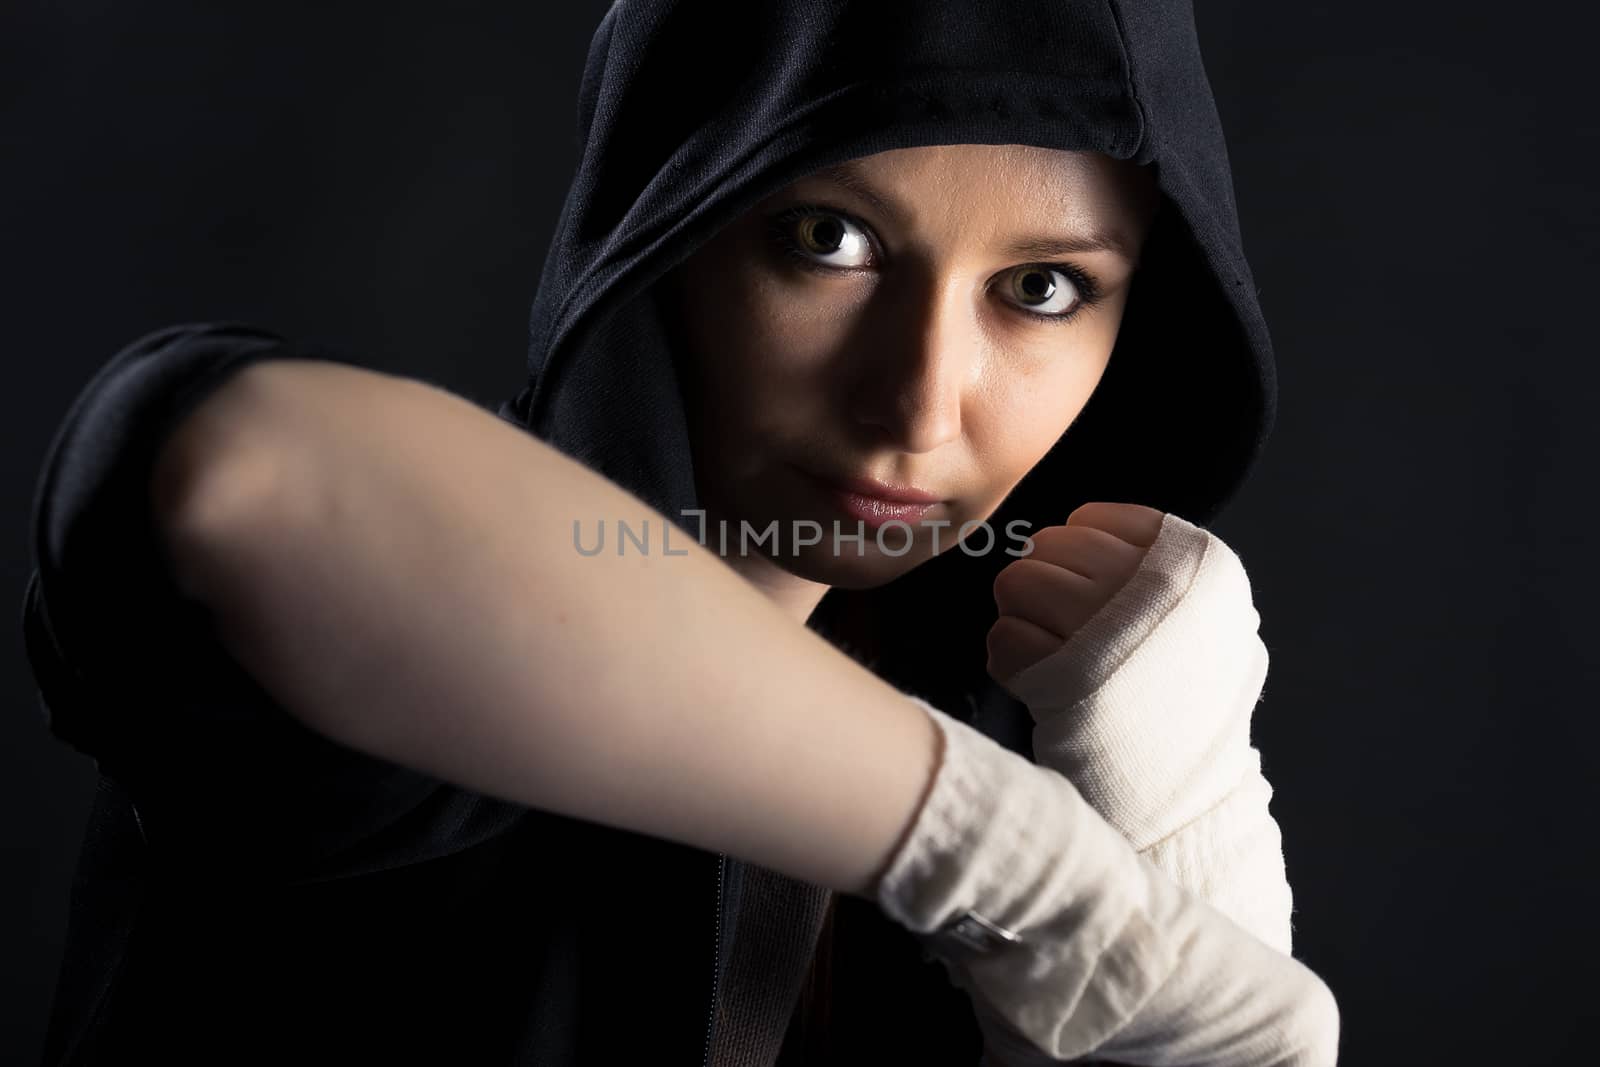 On a black background girl with a fighting stance